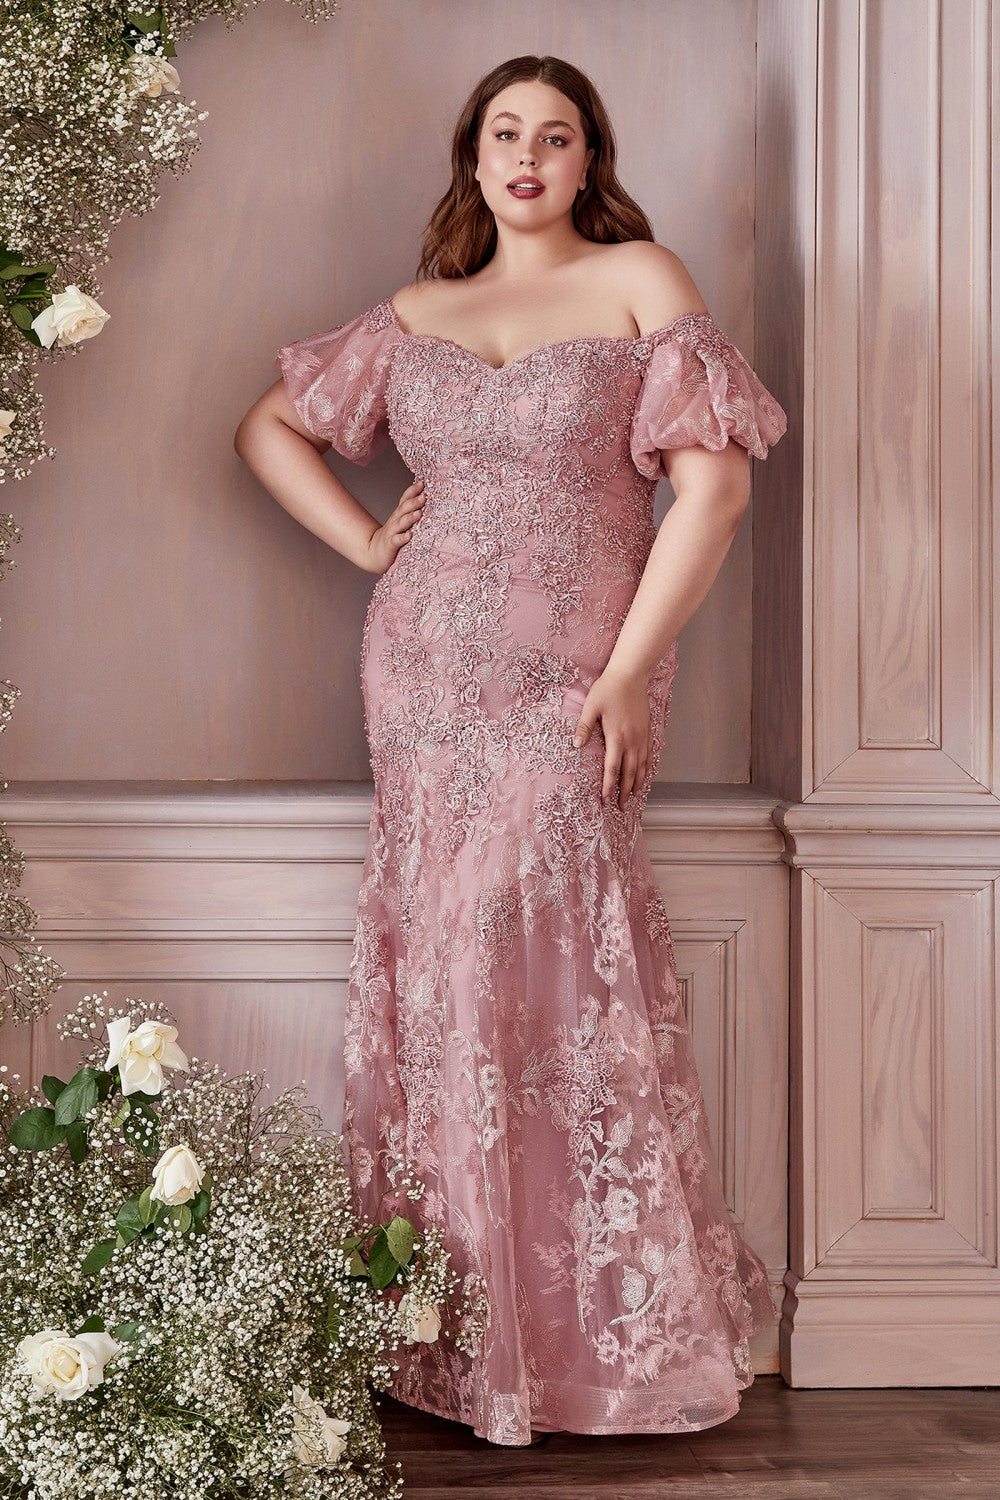 Off Shoulder Mermaid Gown Embroidered with Floral Pattern Prom & Bridesmaid Dress Short Puff Sleeve CDCD959C Elsy Style Prom Dress